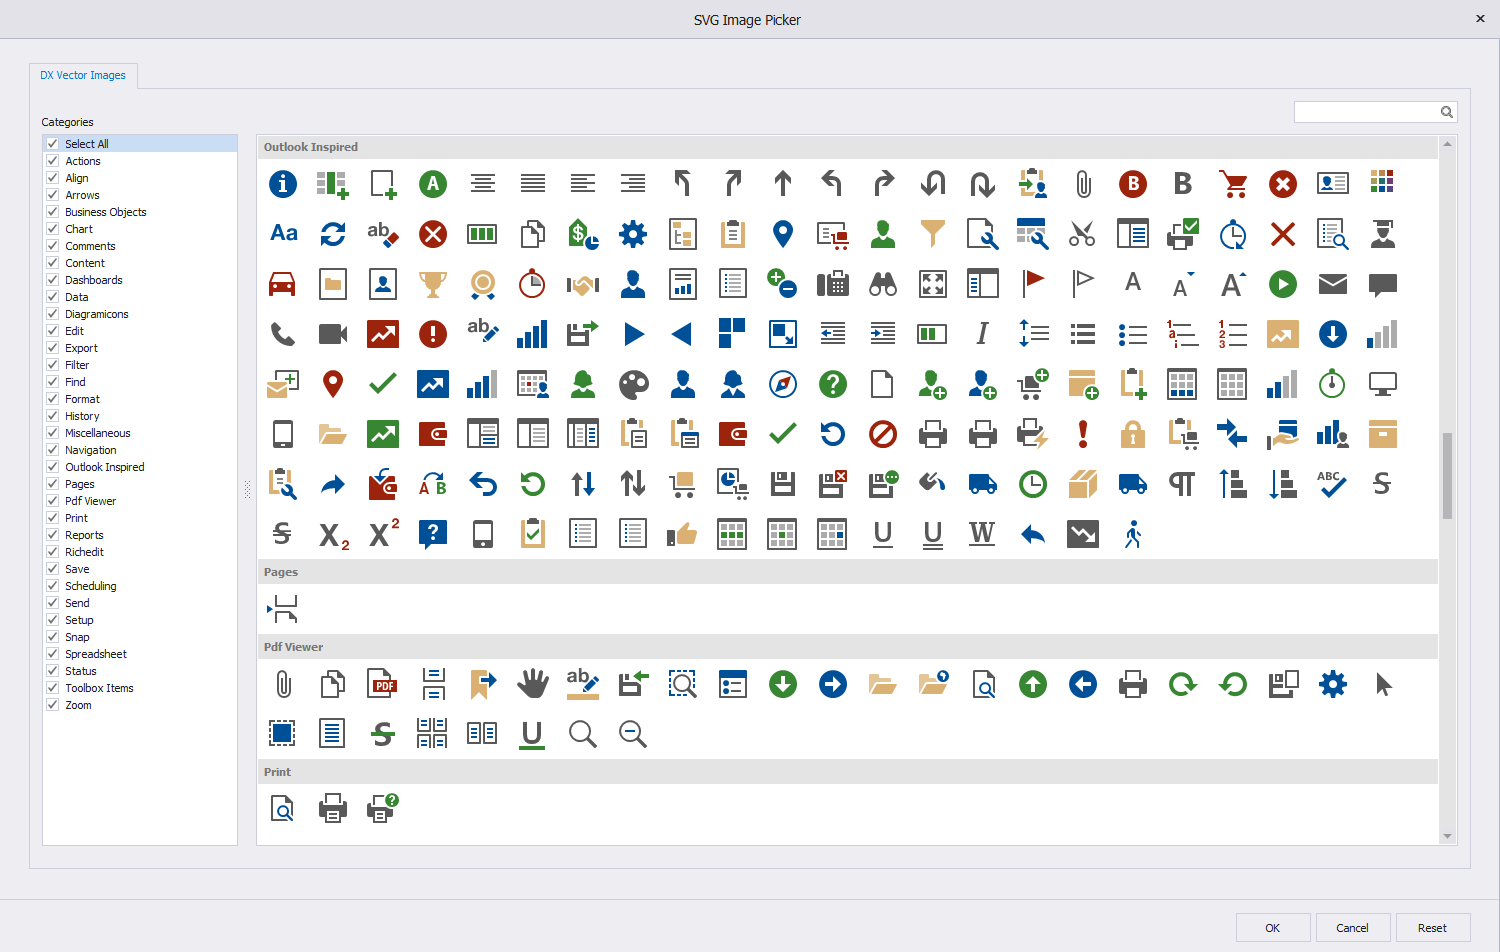 Comprehensive SVG Image Collection - WPF Data Editors | DevExpress